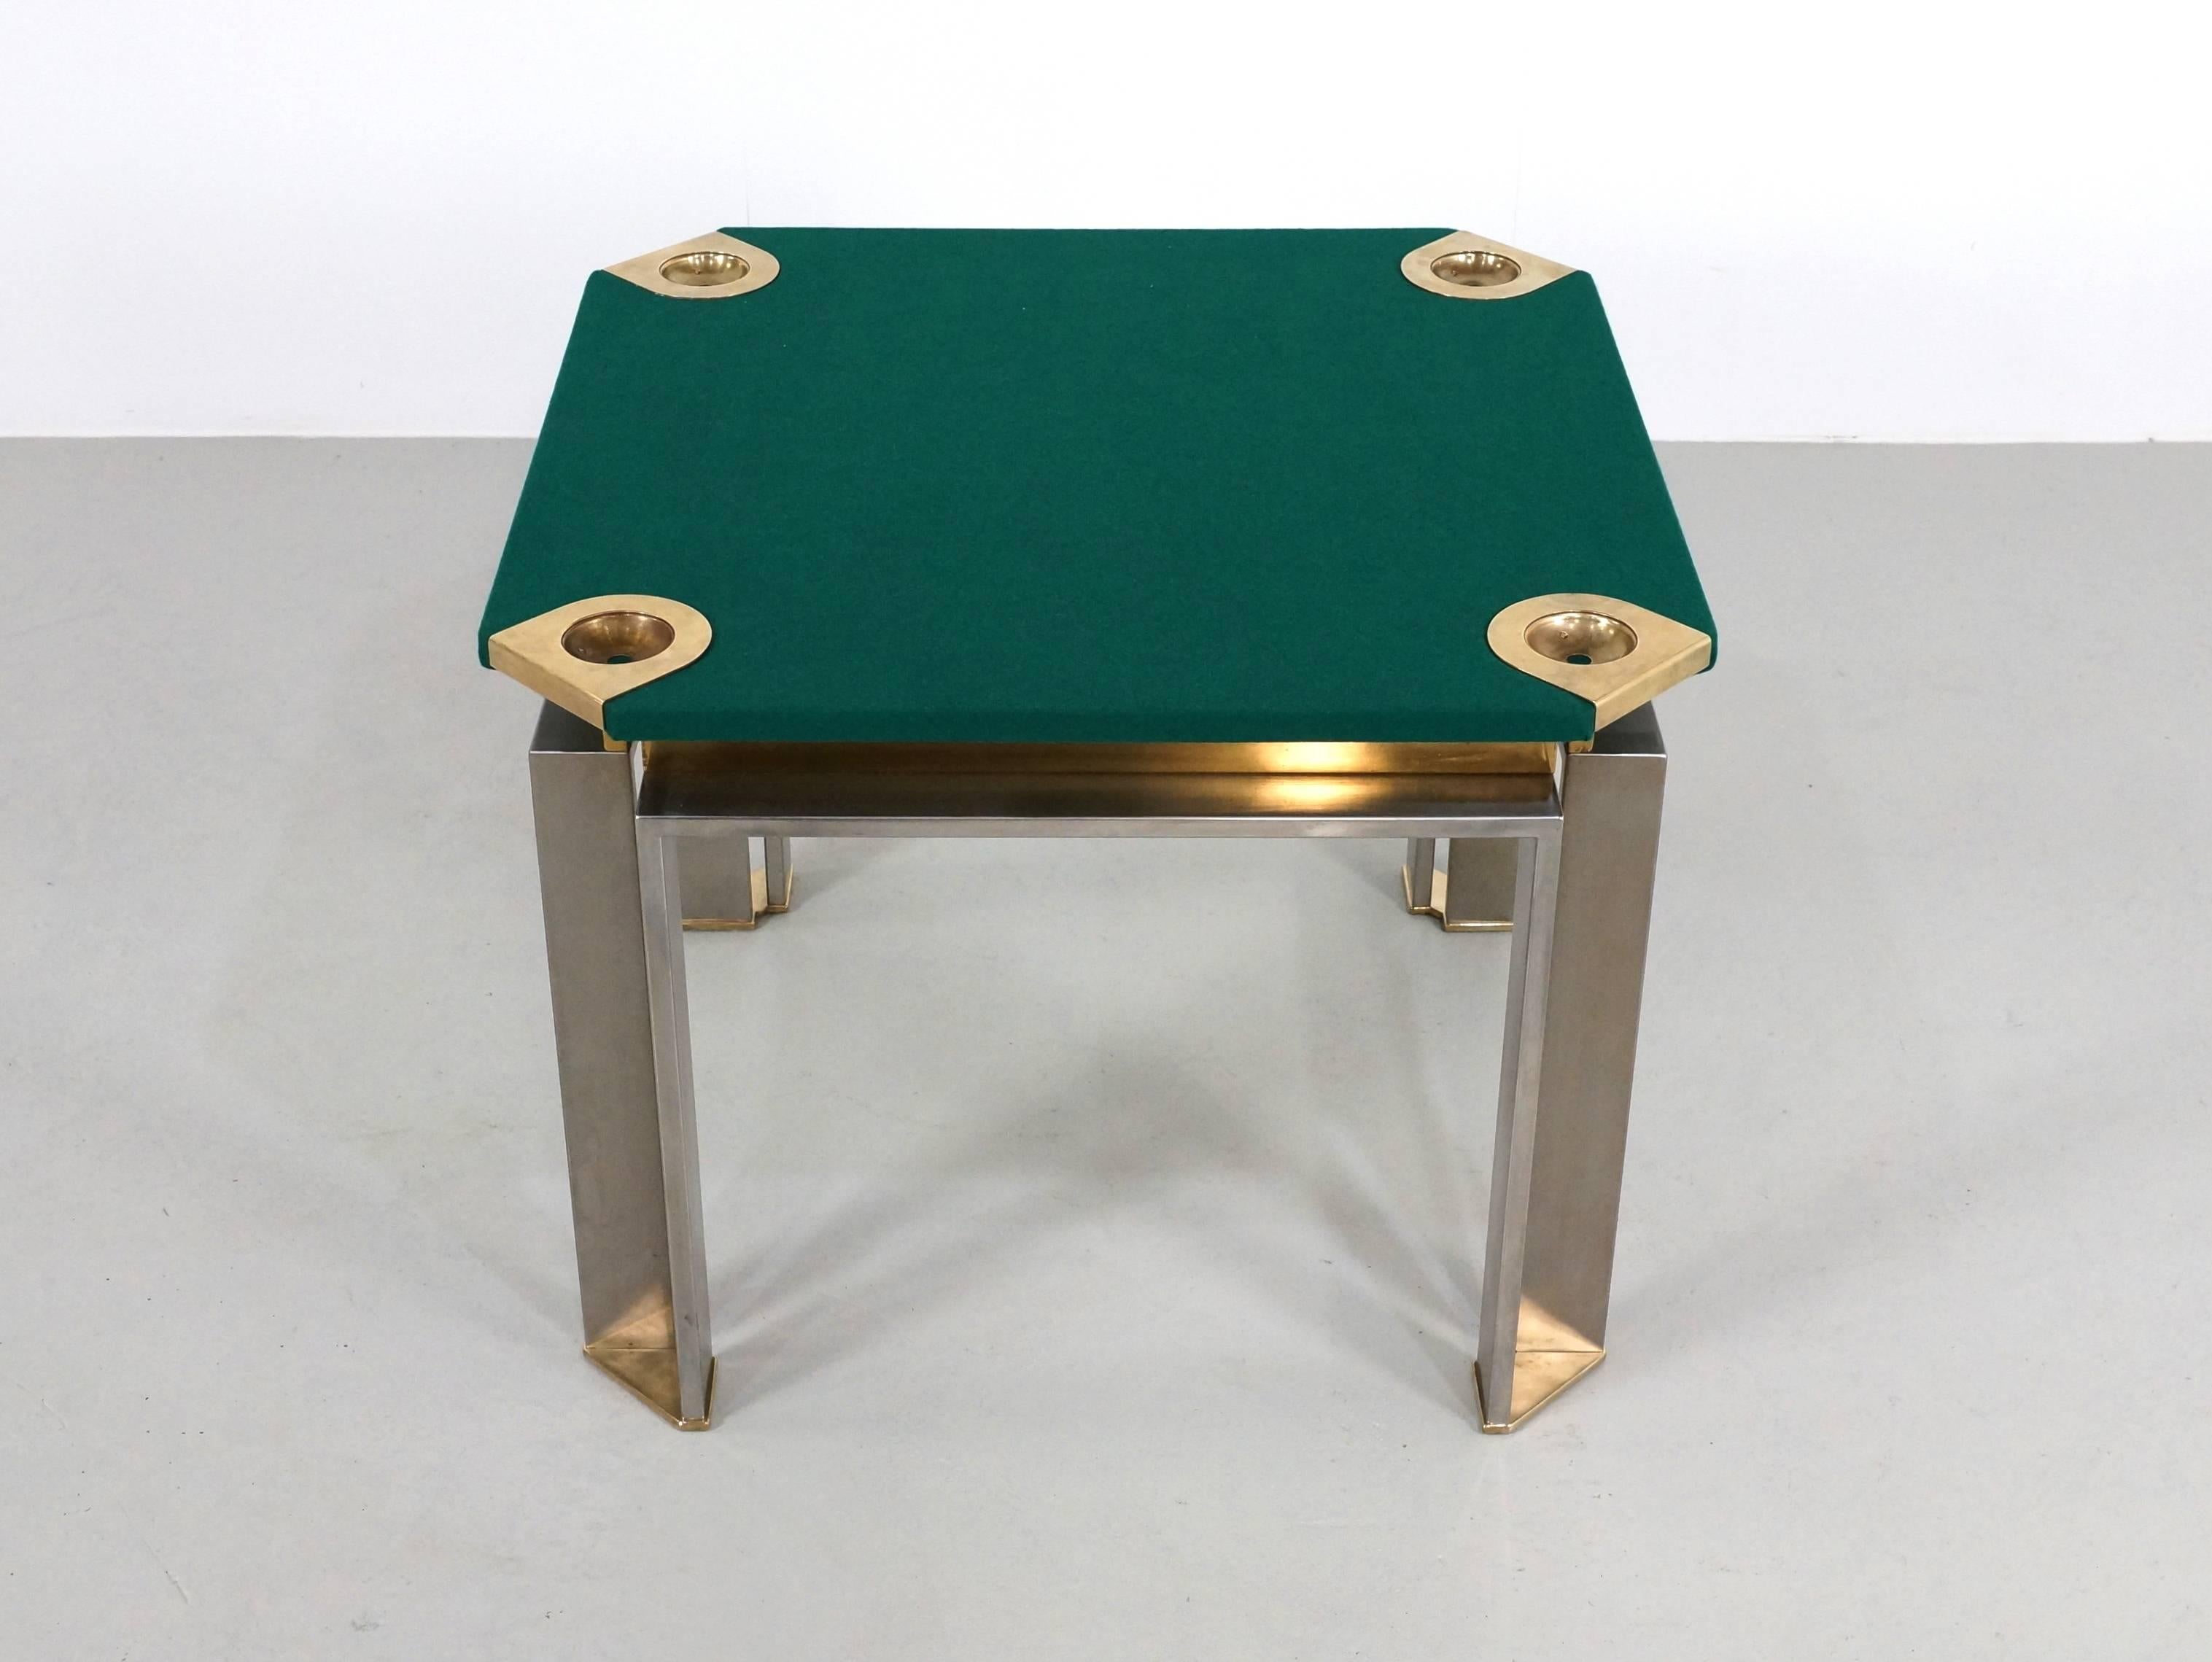 Beautiful play table by Romeo Rega in brass and stainless steel with green felt top and brass corners to put in the money. Nice and exceptional piece in very good condition. The felted top has been replaced, so its imperfect condition.